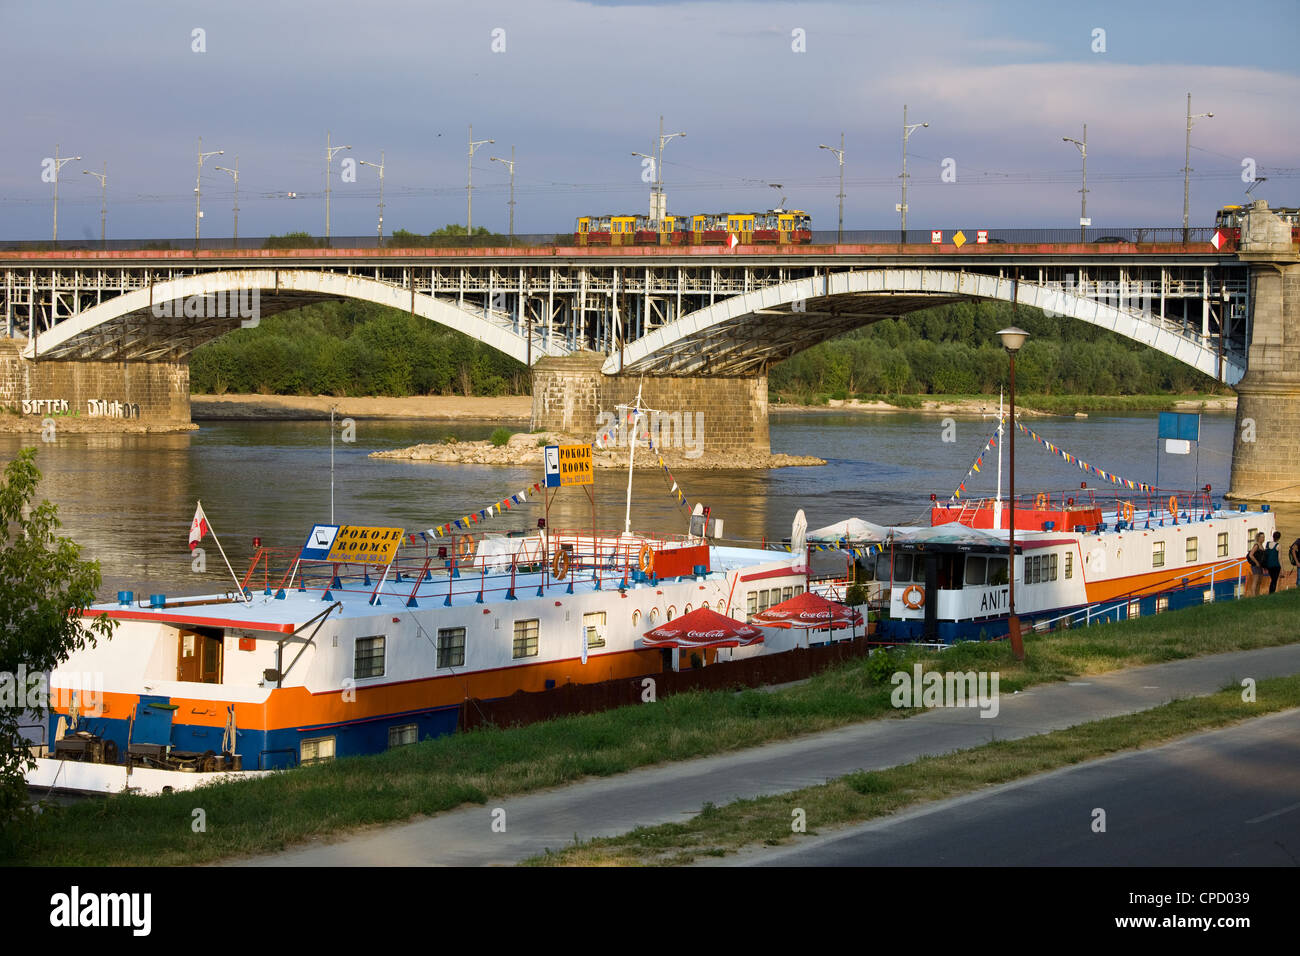 Passenger boats with rooms for rent and restaurant services and Poniatowski Bridge on the Vistula river in Warsaw, Poland. Stock Photo